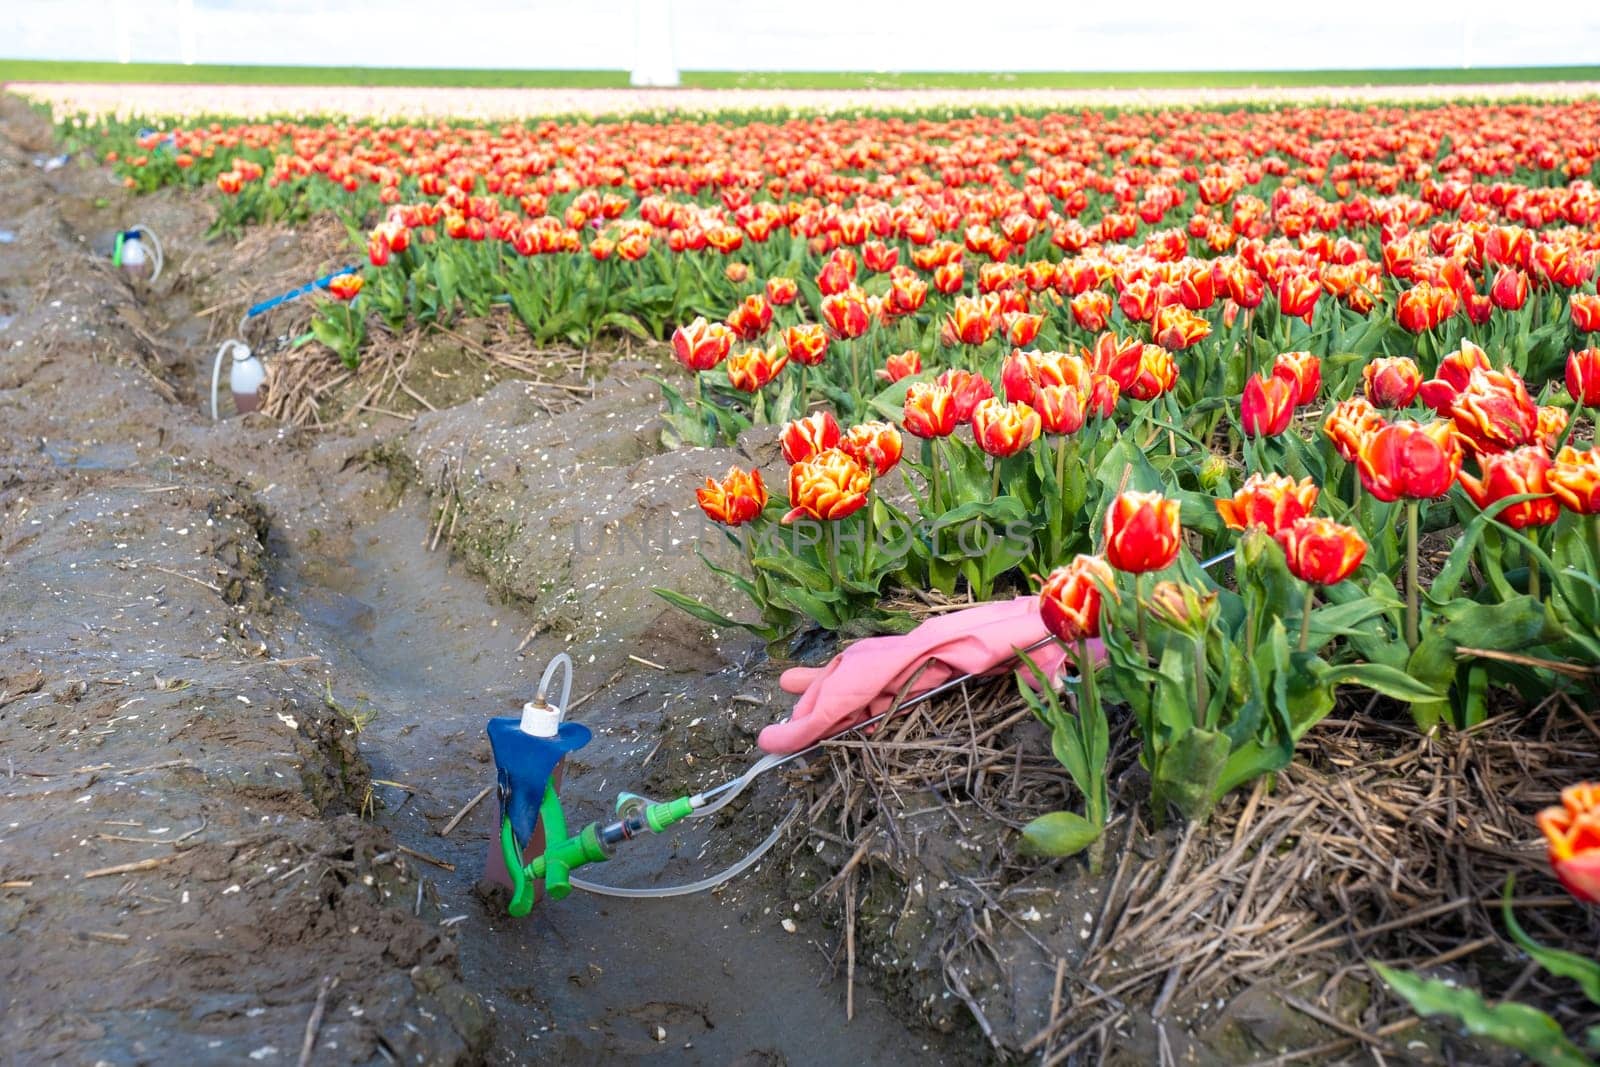 sprayer with pesticides and gloves on the ground with a colorful tulip field in the Netherlands. Glyphosate herbicide